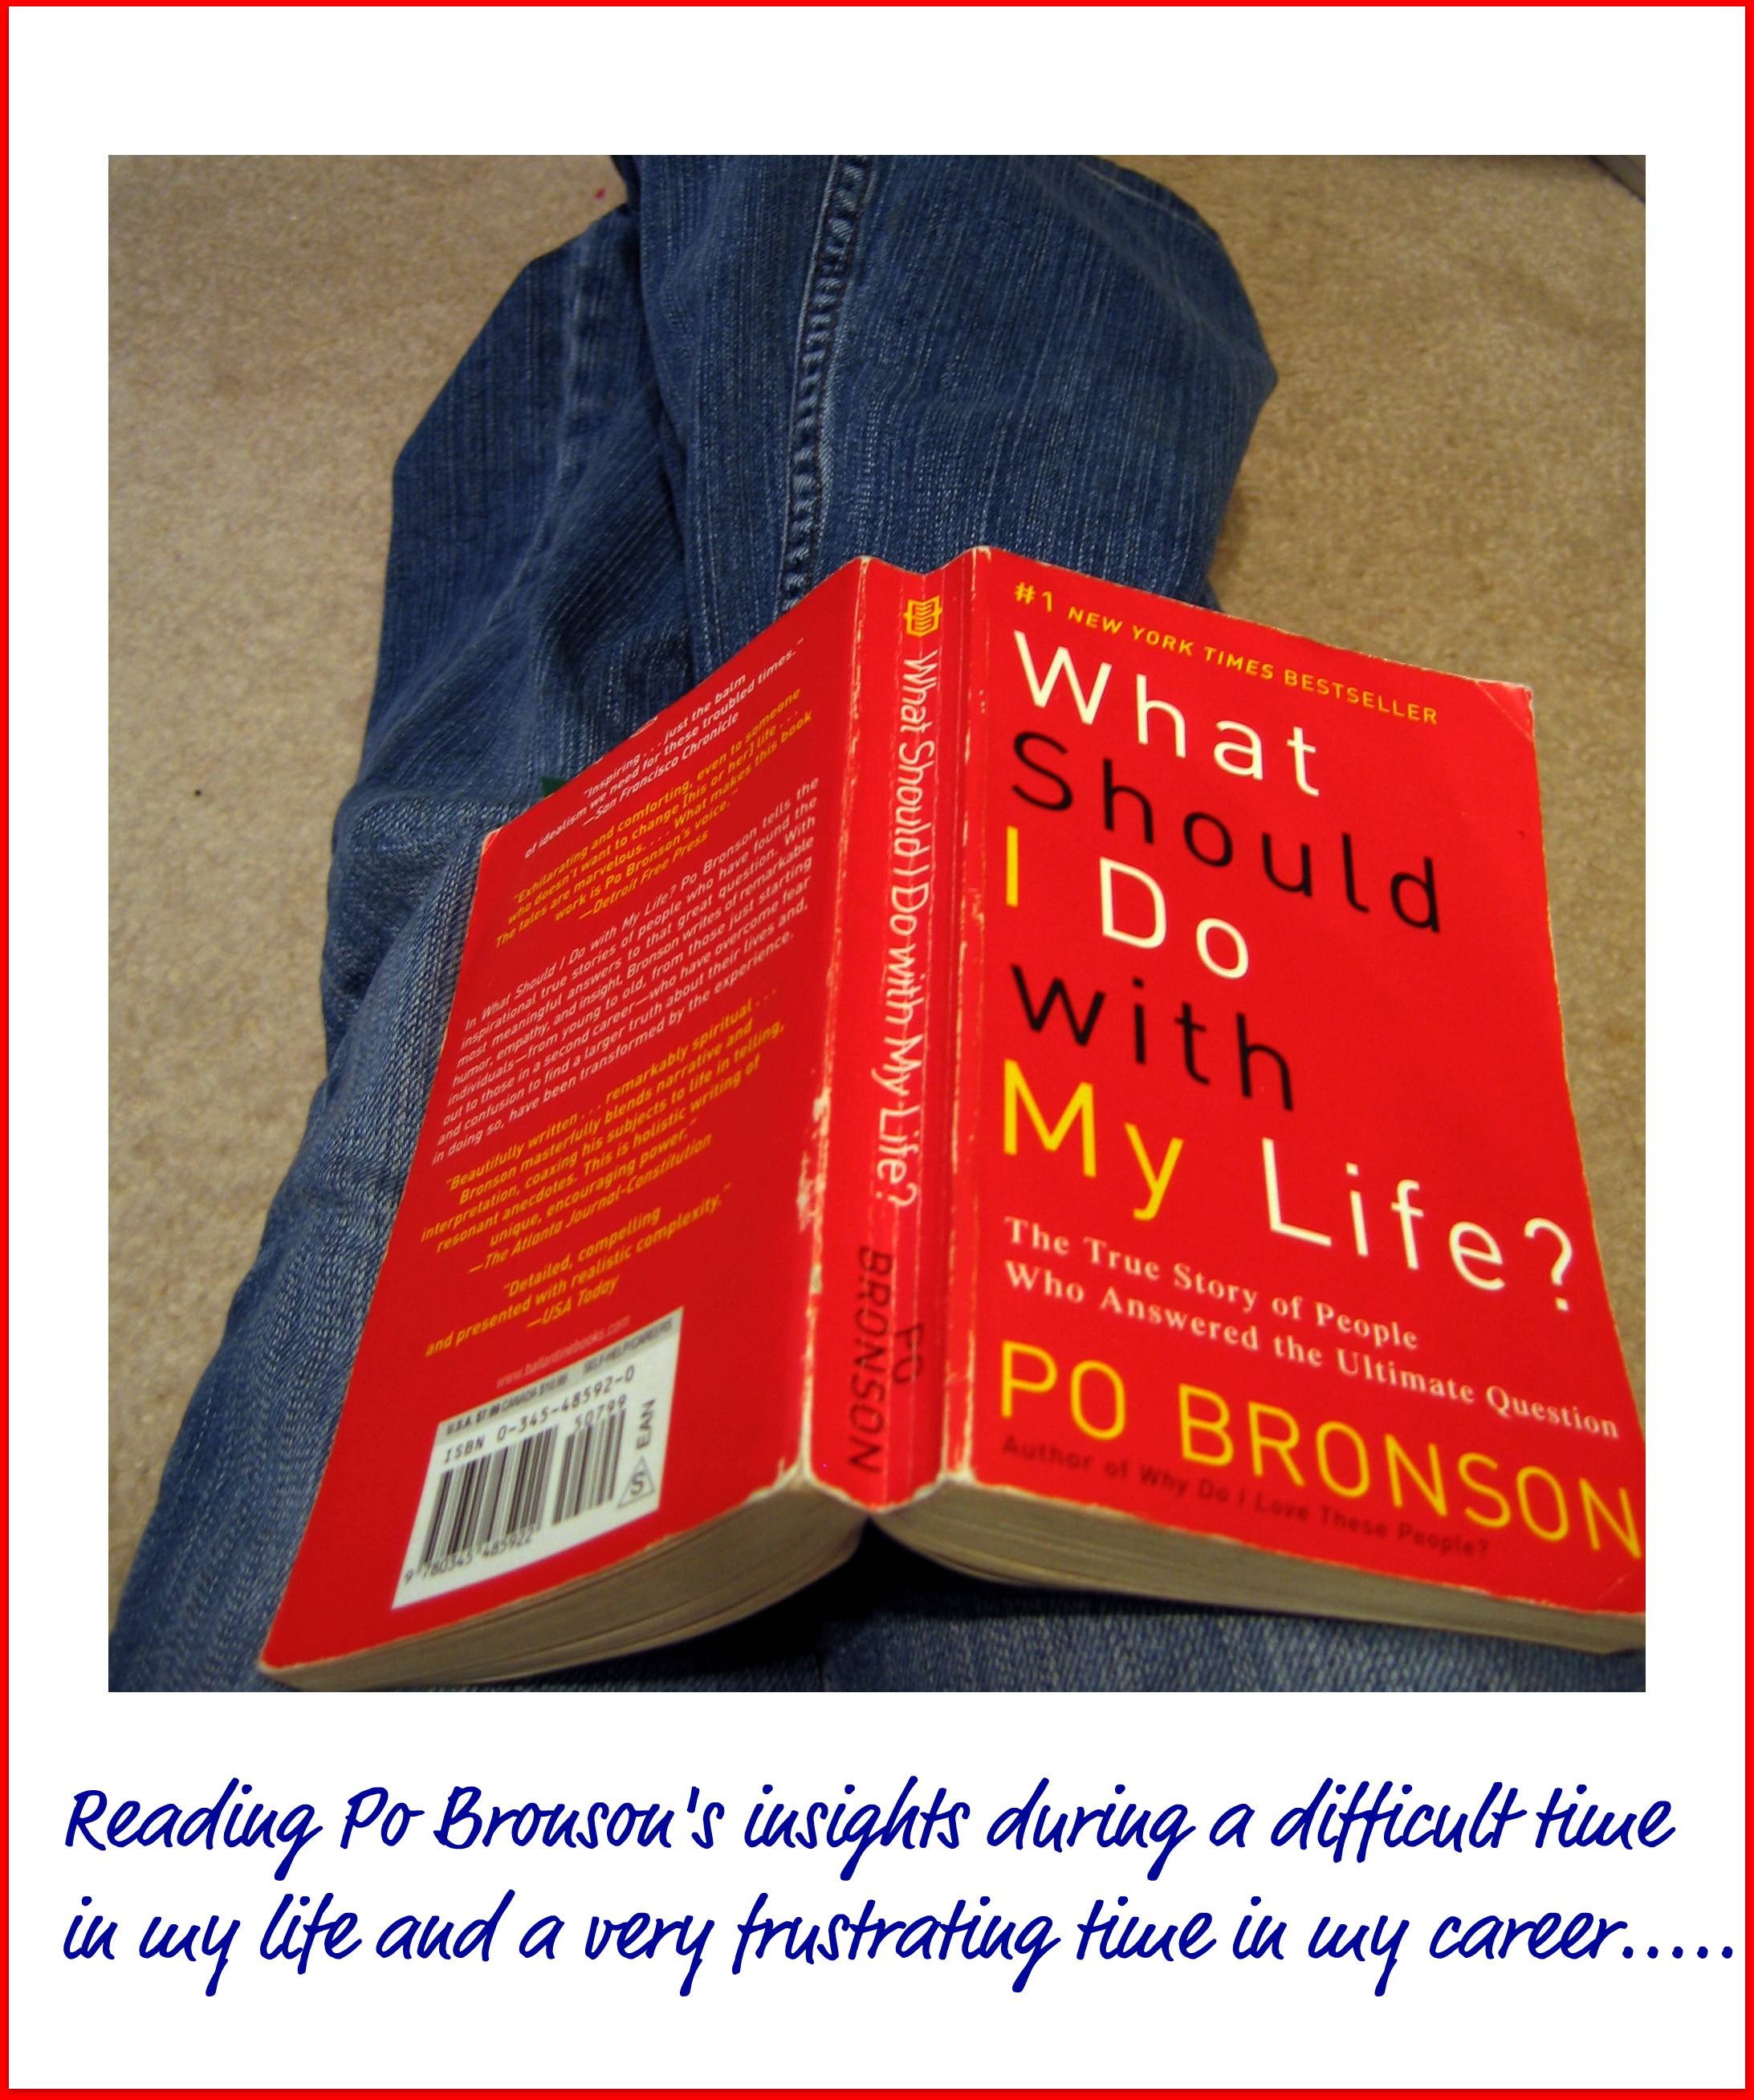 What Should I Do With My Life book by Po Bronson